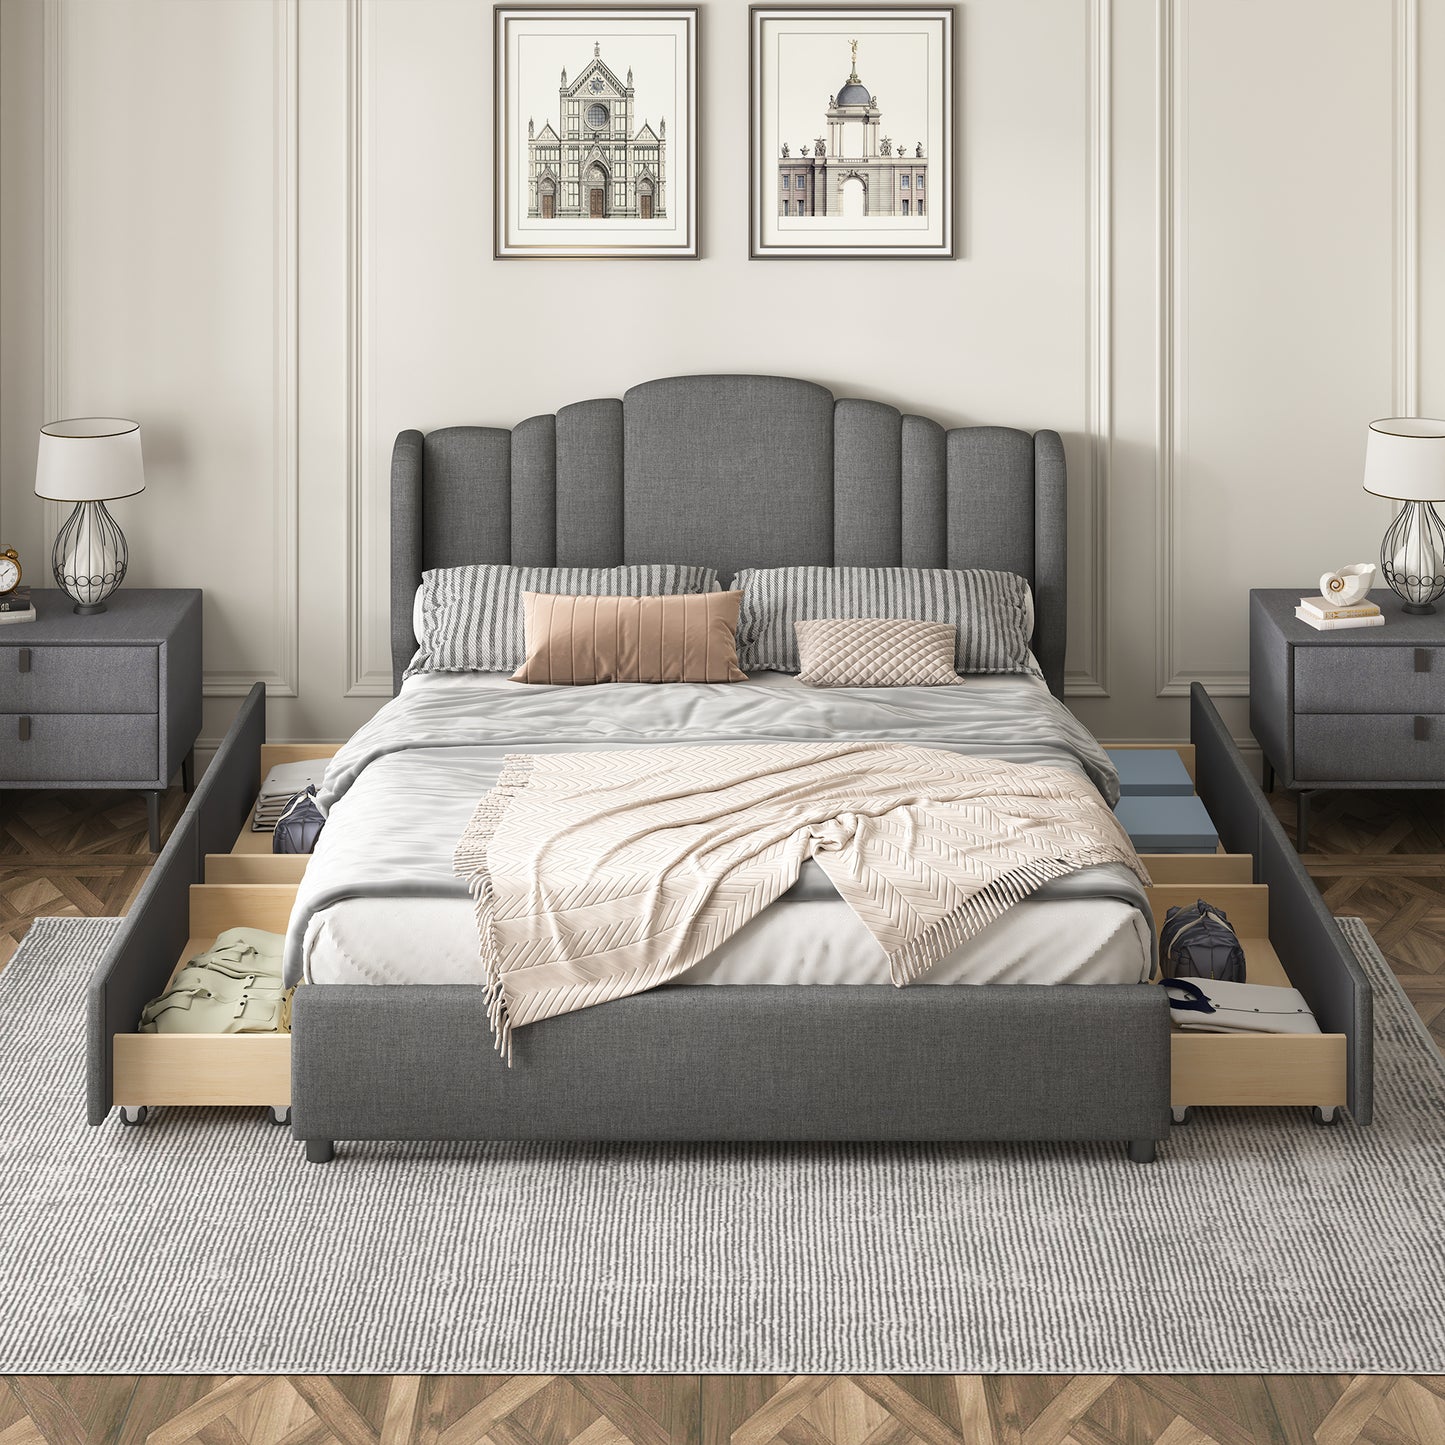 upholstered platform bed with wingback headboard and 4 drawers, gray